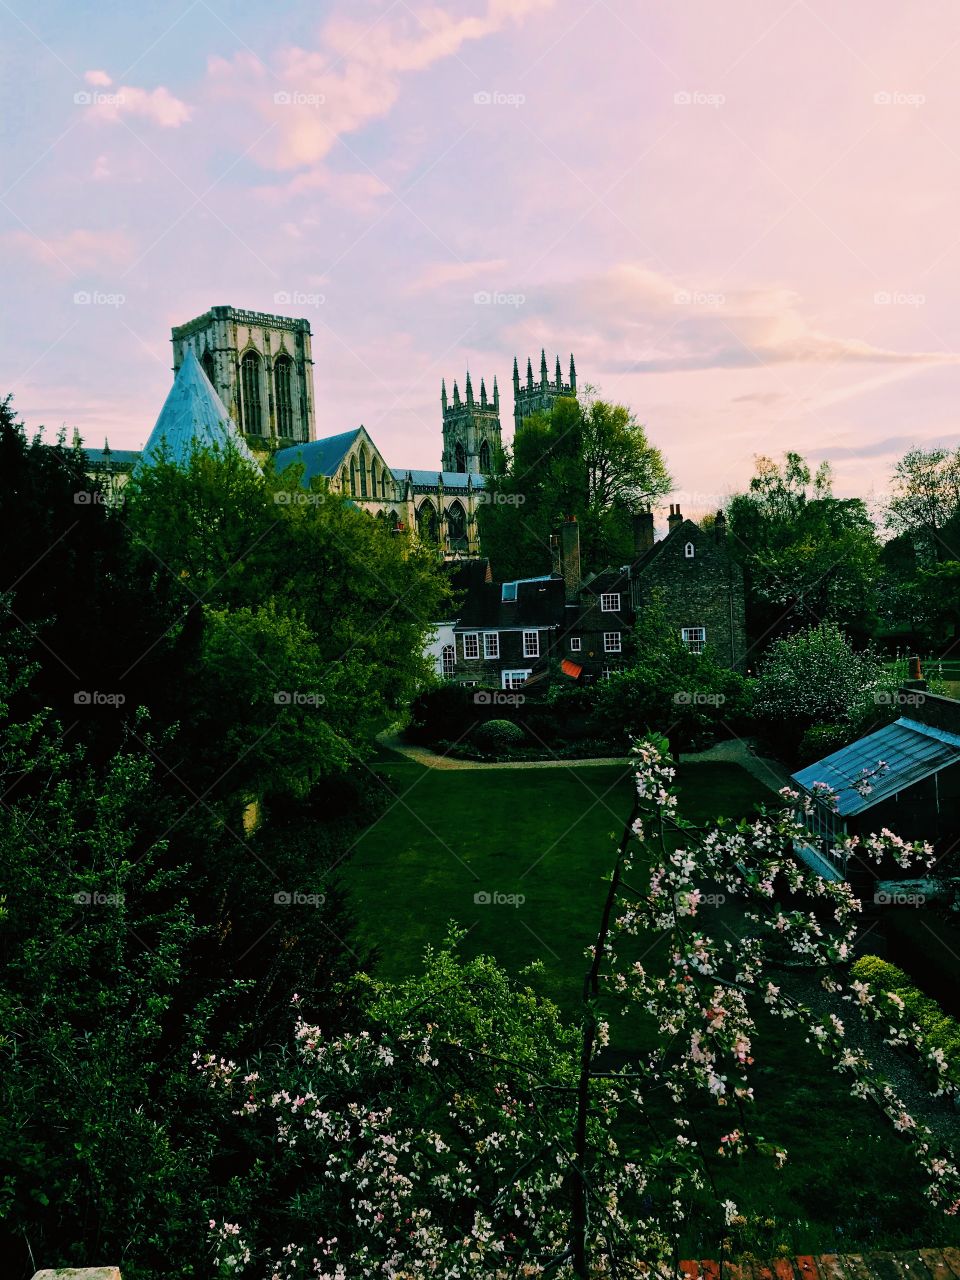 Another hidden view of the Minster, this image shows the minster against a pink evening sky with springtime blossom in the foreground. 